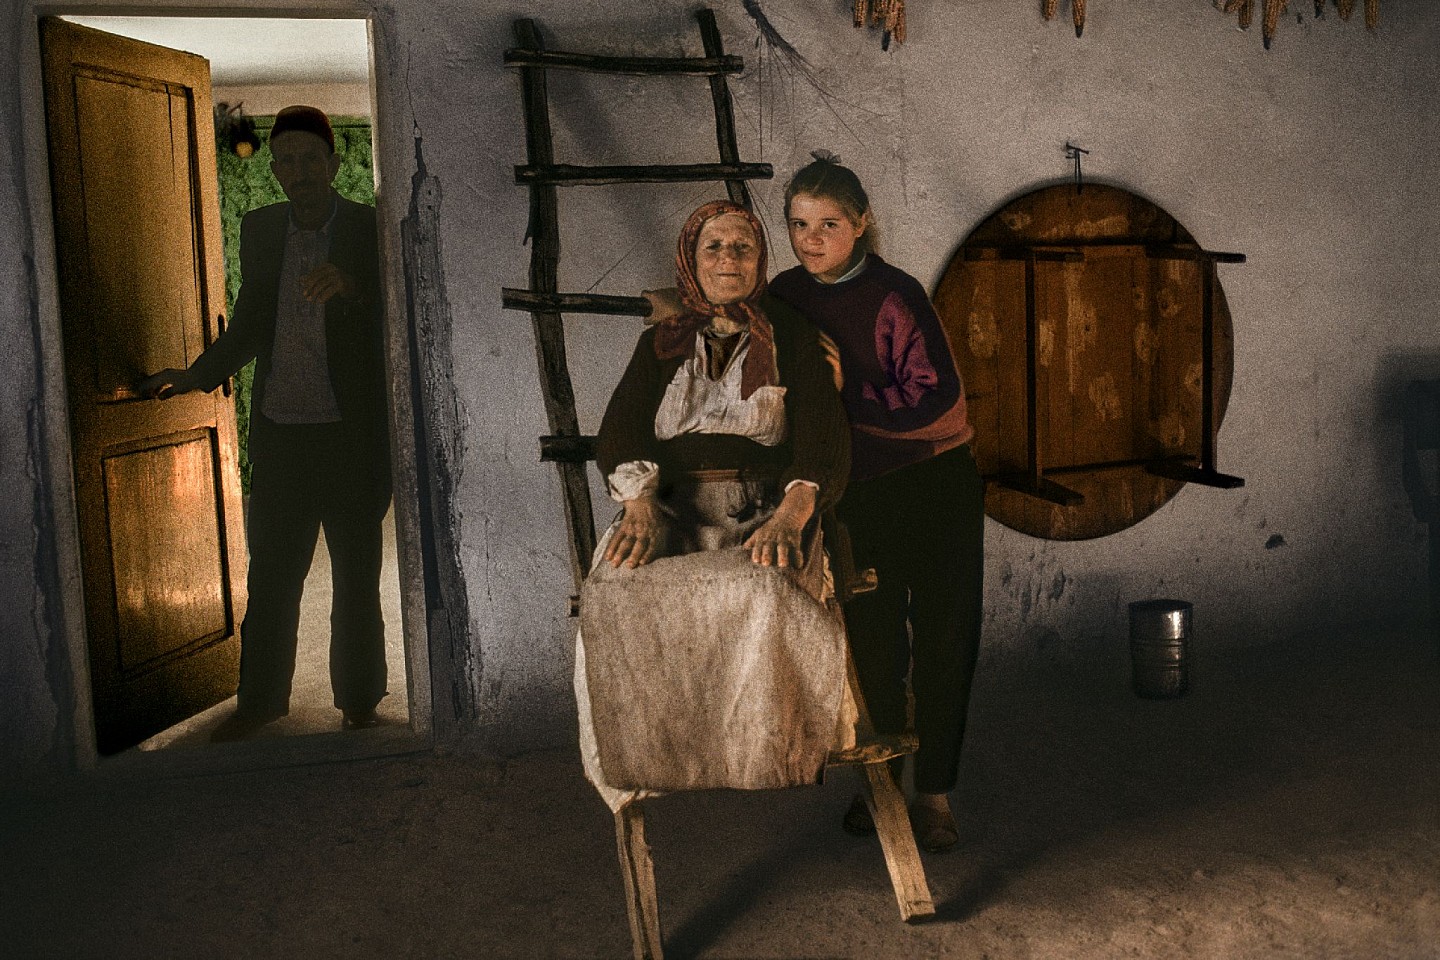 Steve McCurry, Albanian Farm Family, 1989
FujiFlex Crystal Archive Print
Price/Size on request